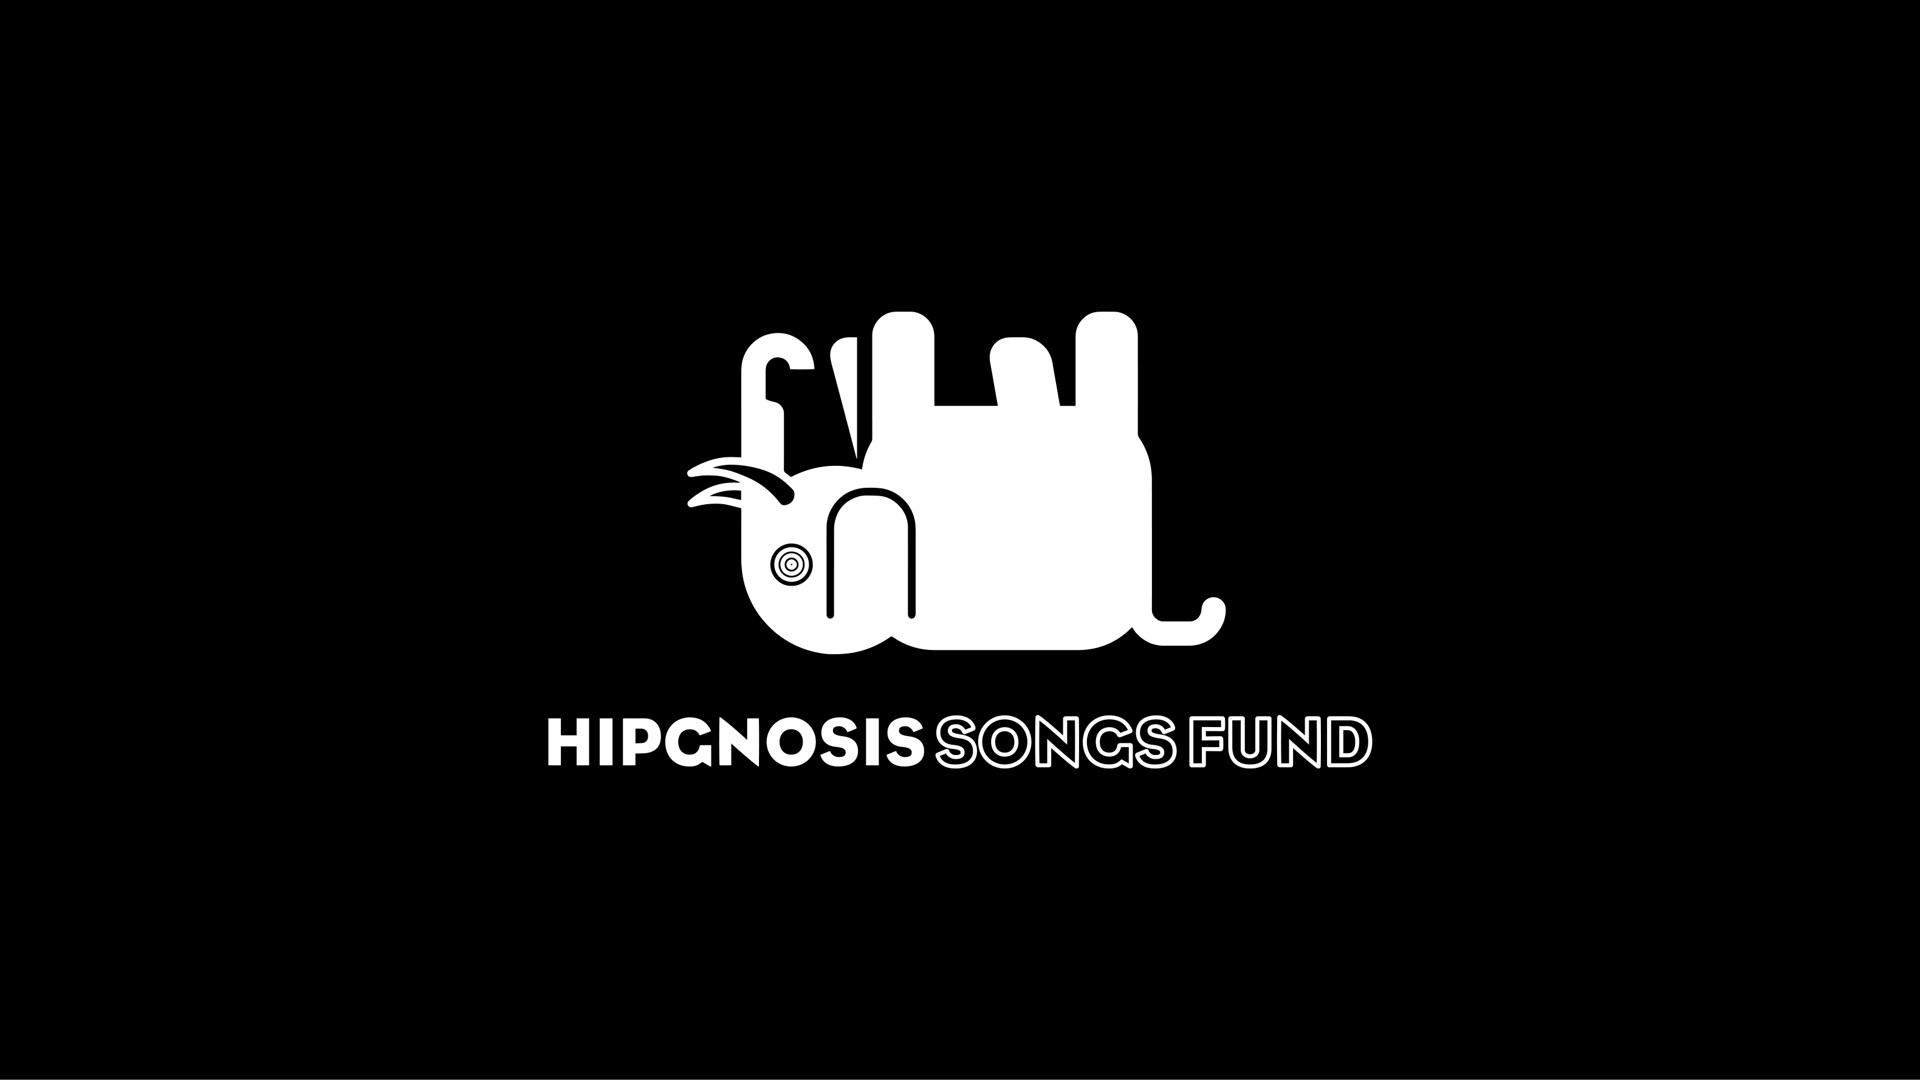 songs fund | Hipgnosis Songs Fund